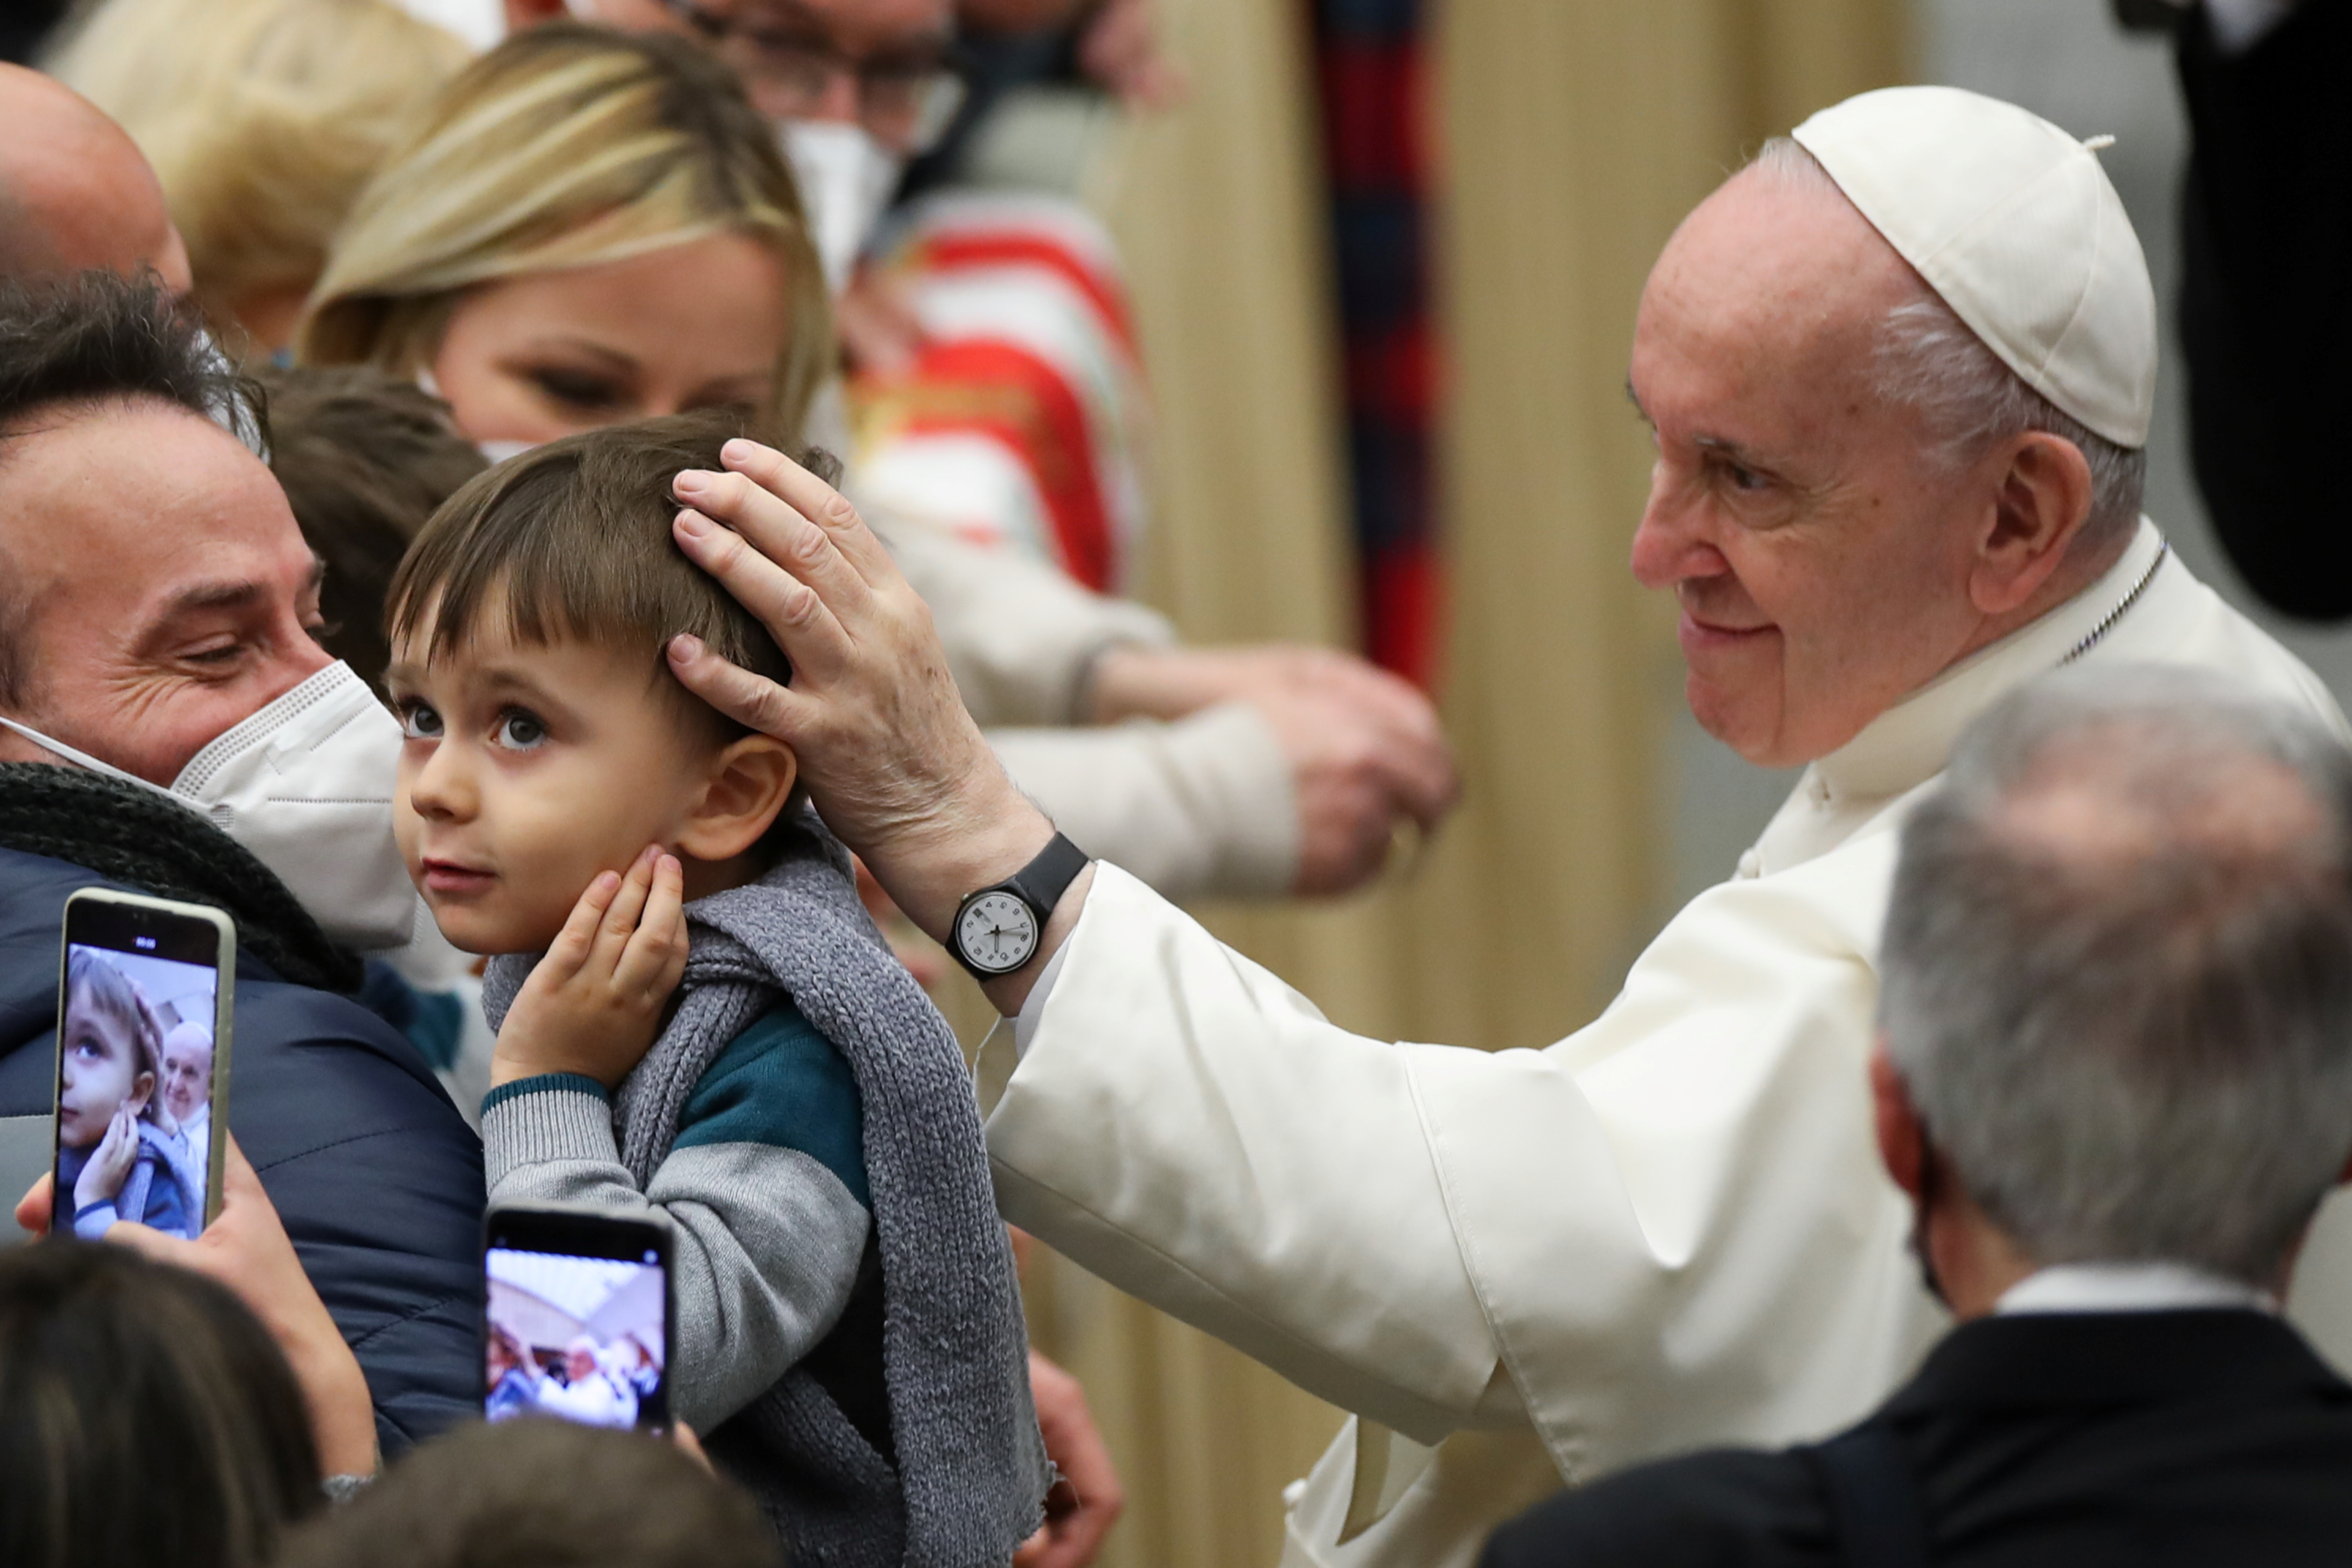 Pope Francis blesses a child after the weekly general audience at the Paul VI Audience Hall, at the Vatican, December 1, 2021. REUTERS/Yara Nardi